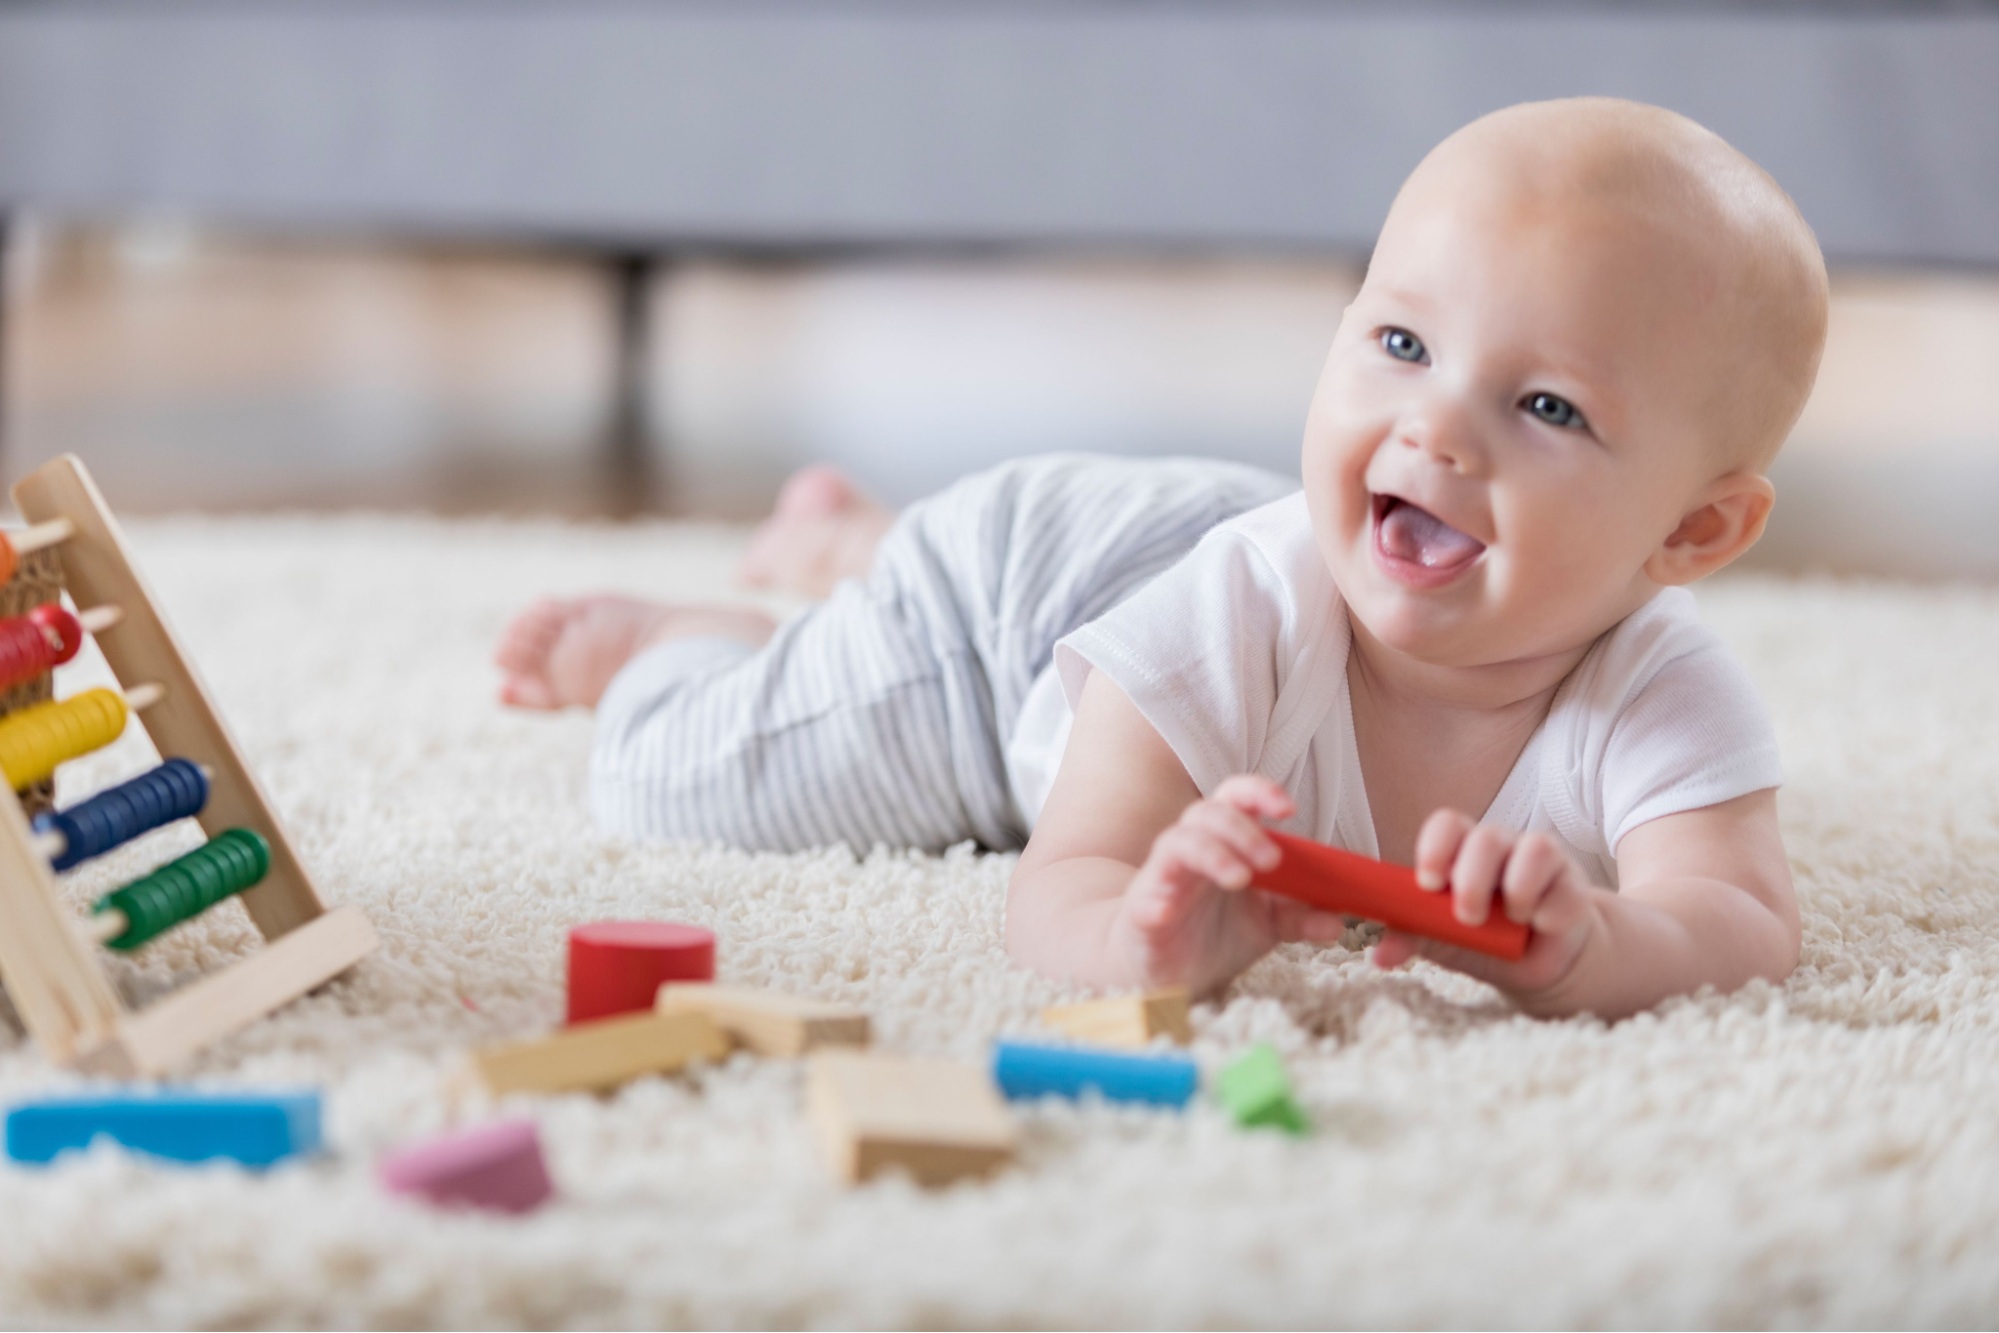 A young baby smiles while playing with toys